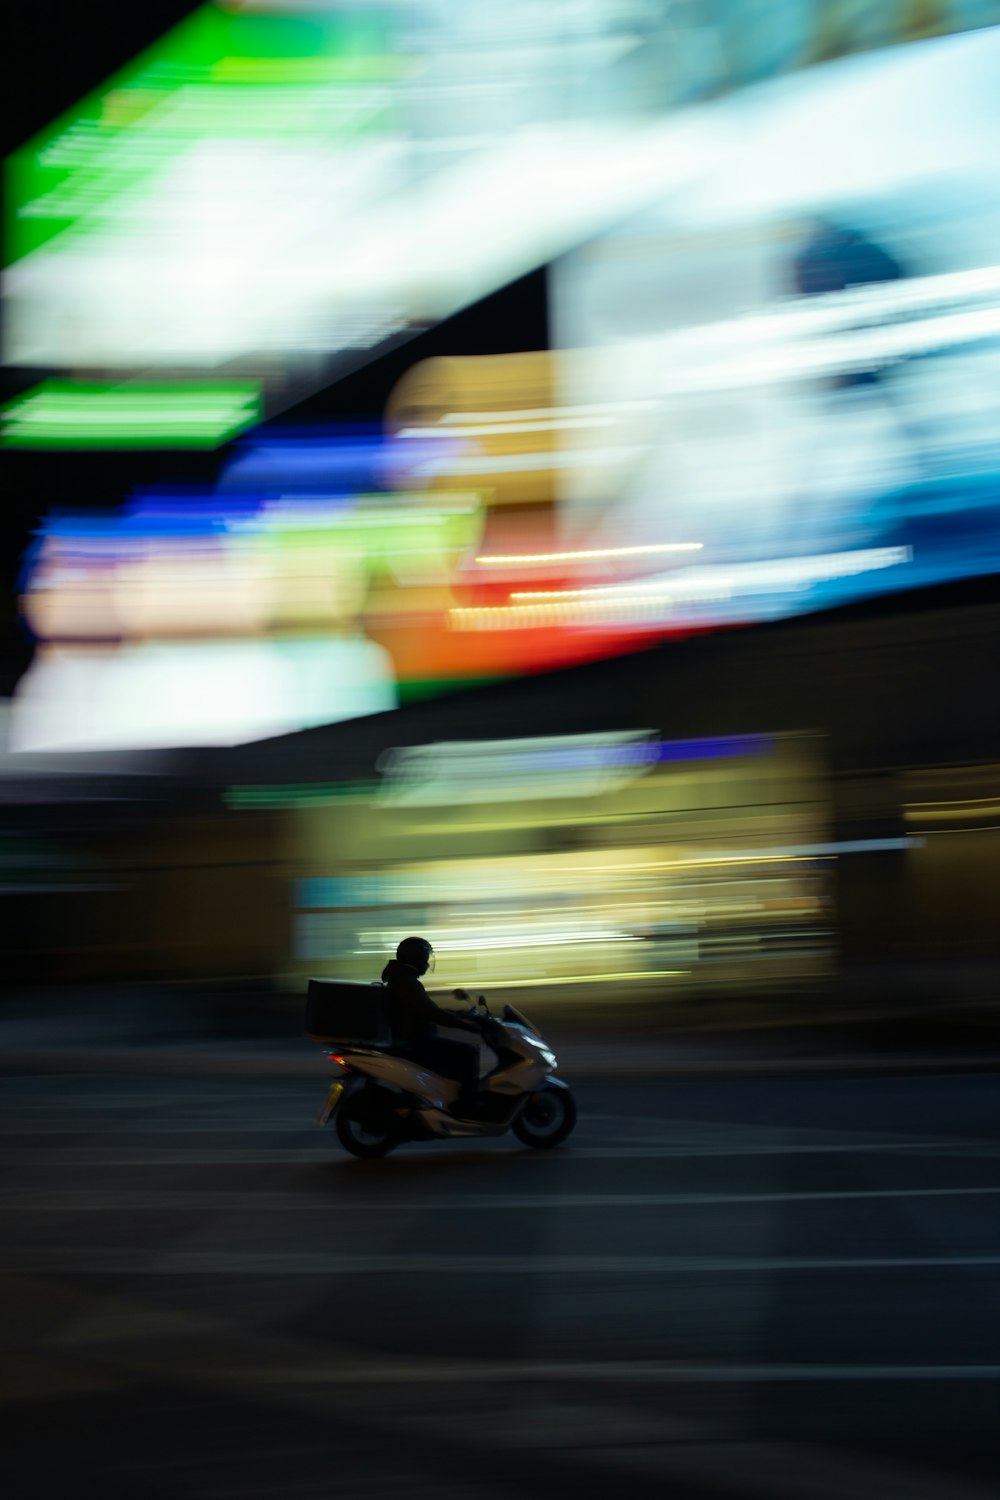 man riding motorcycle on road